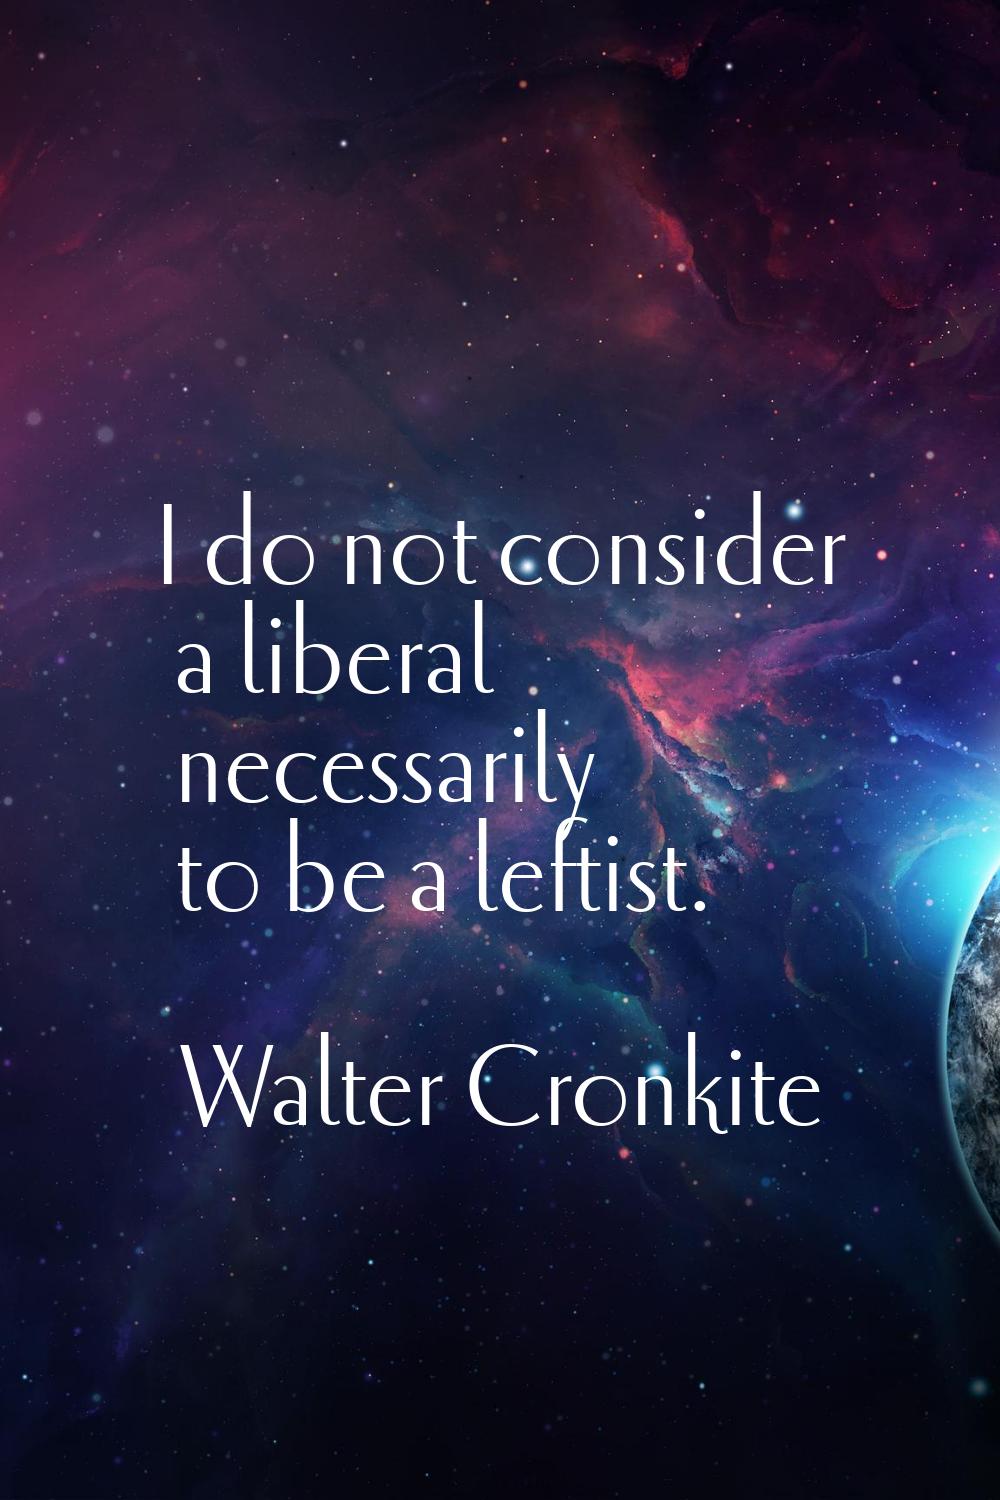 I do not consider a liberal necessarily to be a leftist.